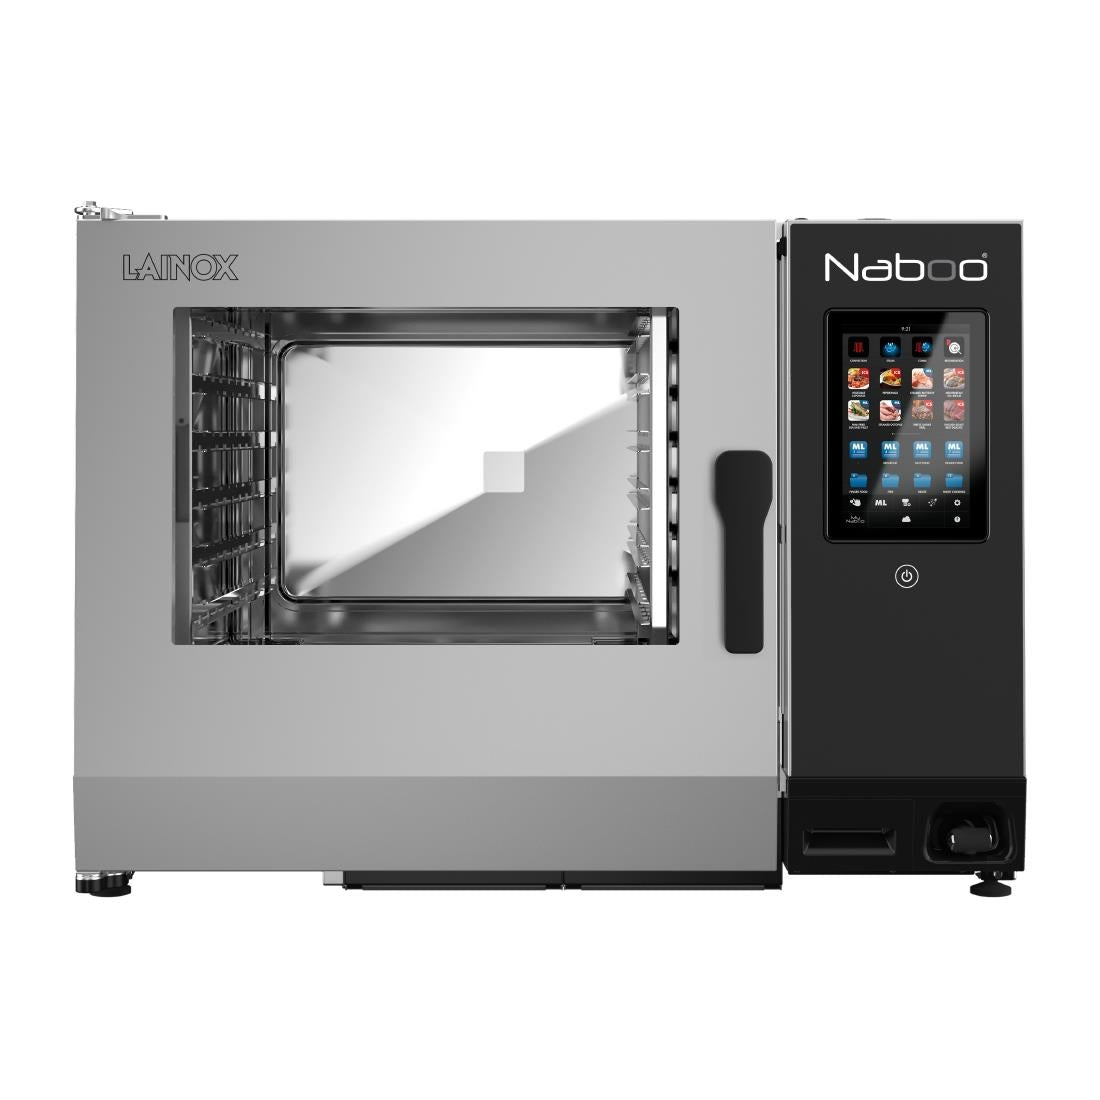 HP544 Lainox Naboo 6x2/1GN Electric Touch Screen Combi Oven with Boiler 3PH NAE062BS JD Catering Equipment Solutions Ltd